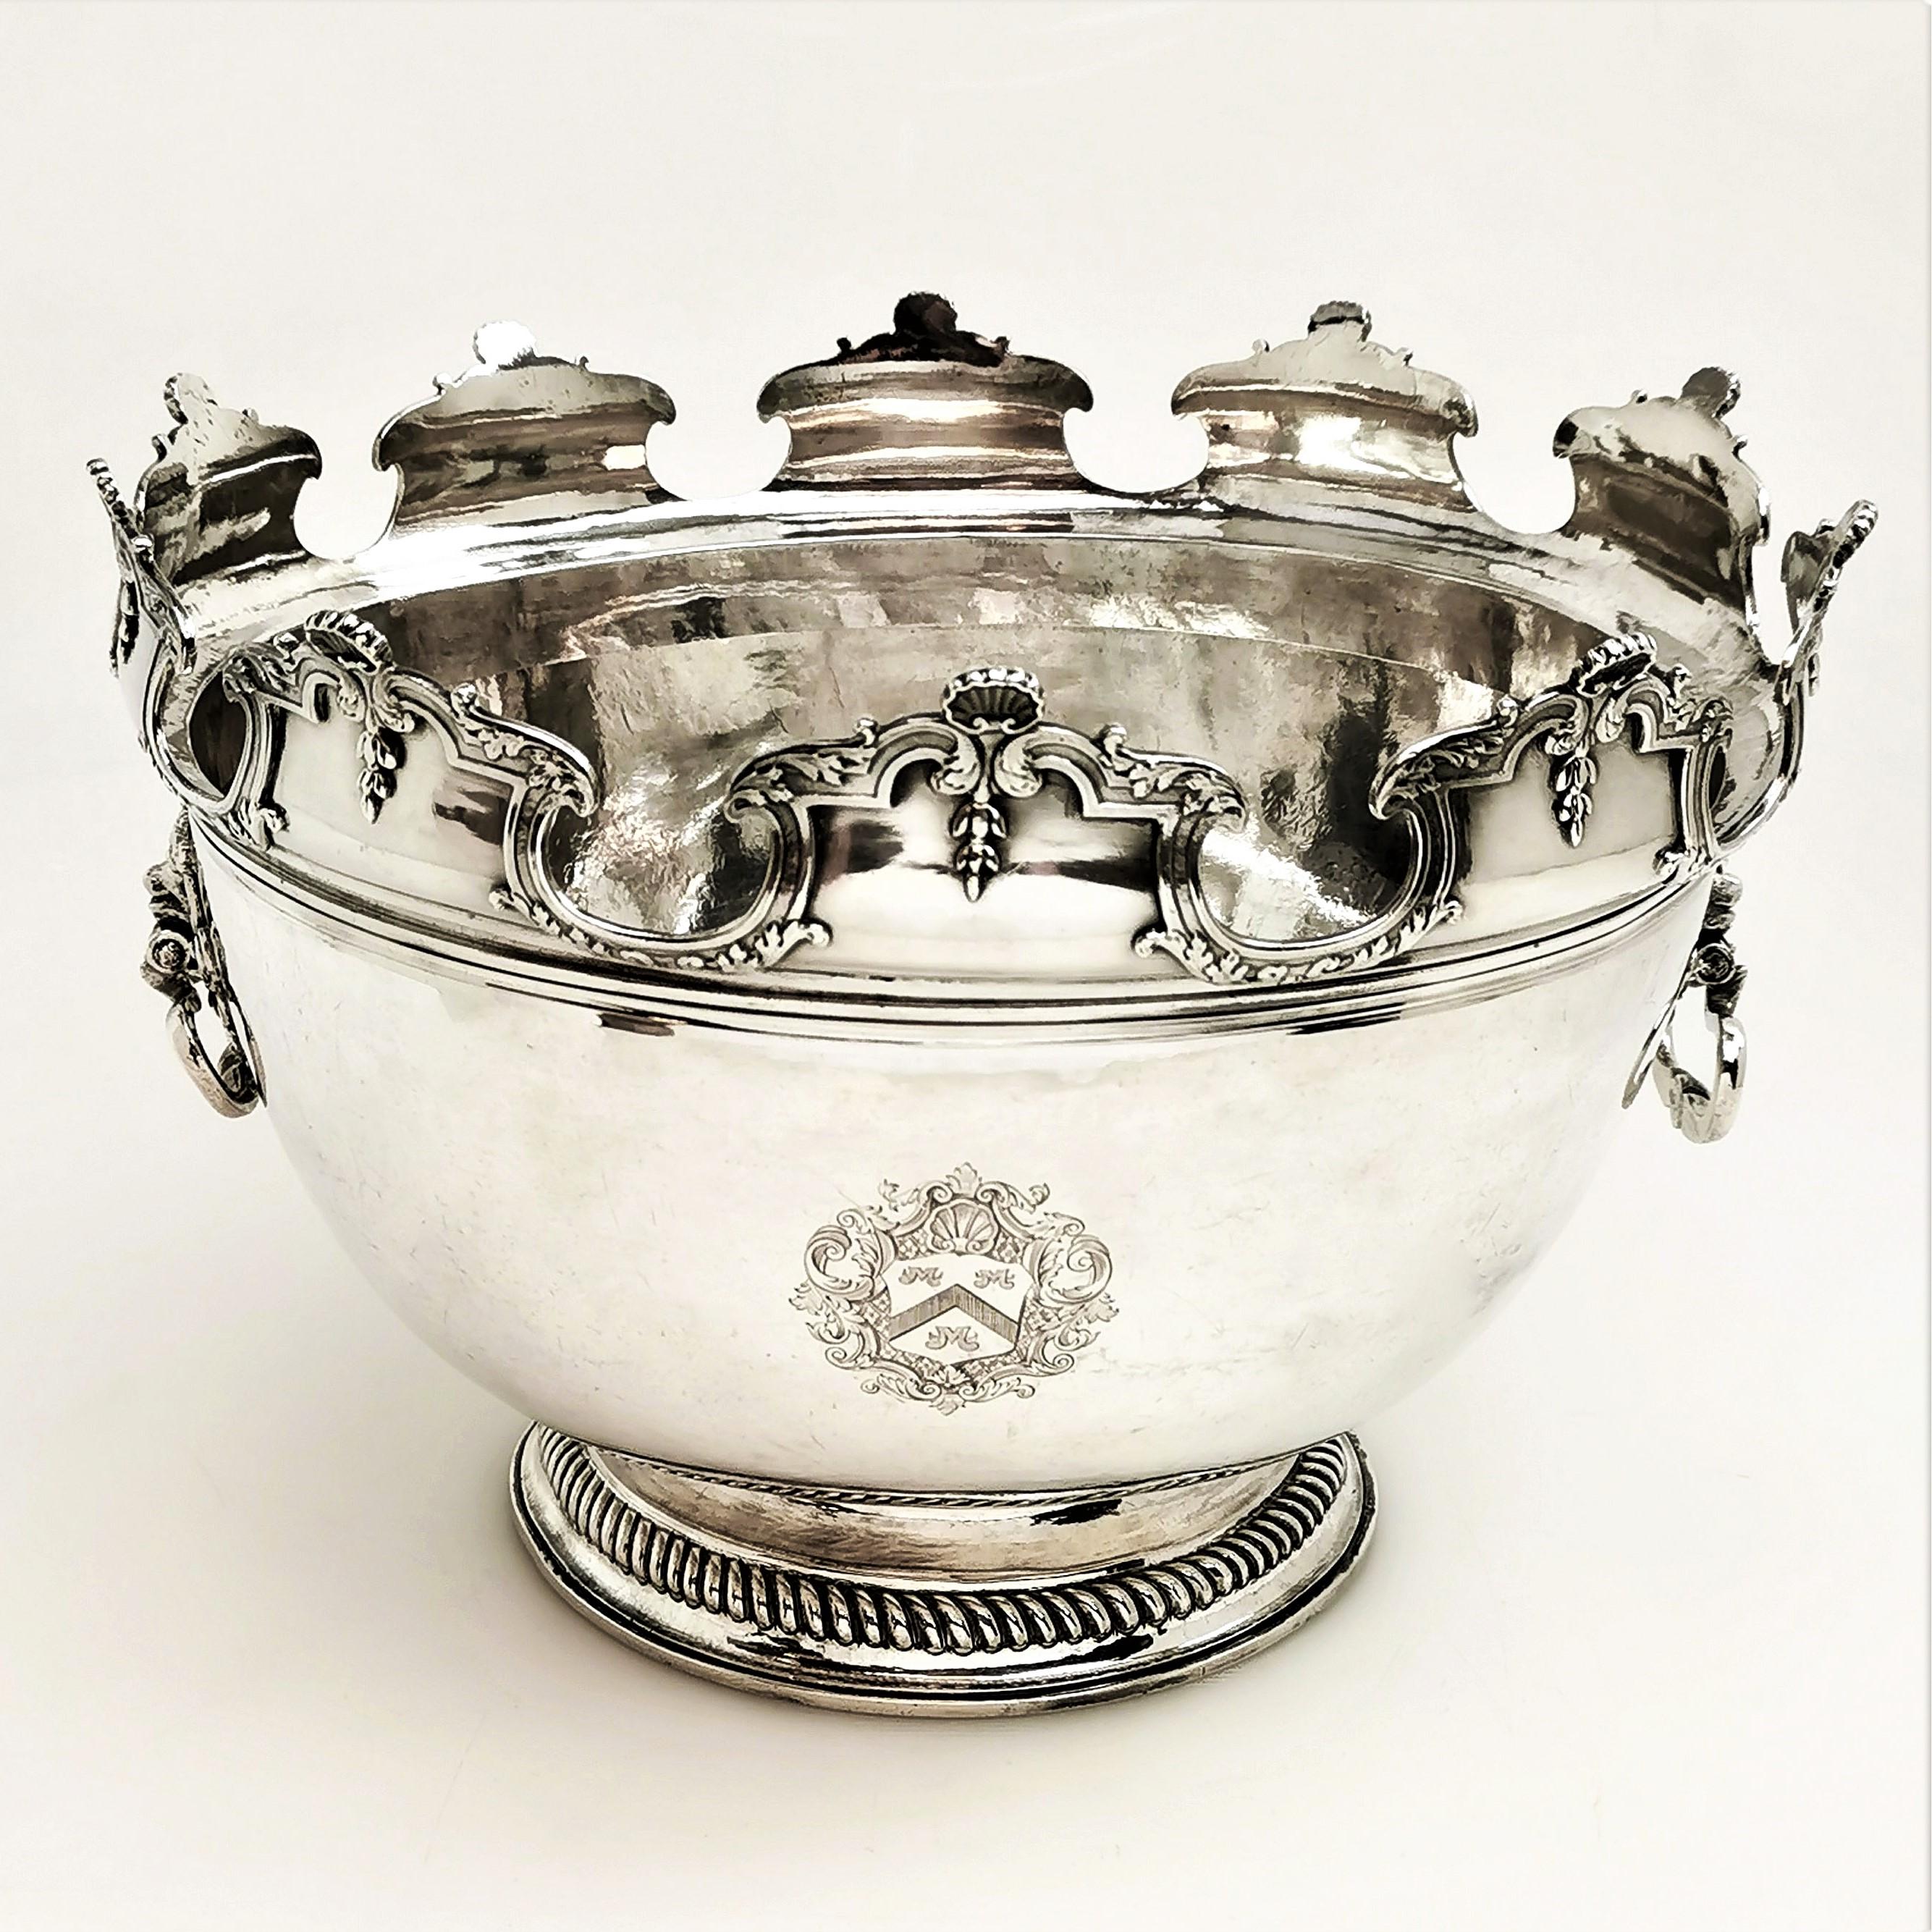 A magnificent William III Antique solid Silver Punch Bowl with an original removable silver collar, allowing for use as a traditional punch bowl or as an elegant serving bowl. The Bowl is typical of the period although notably large, and is